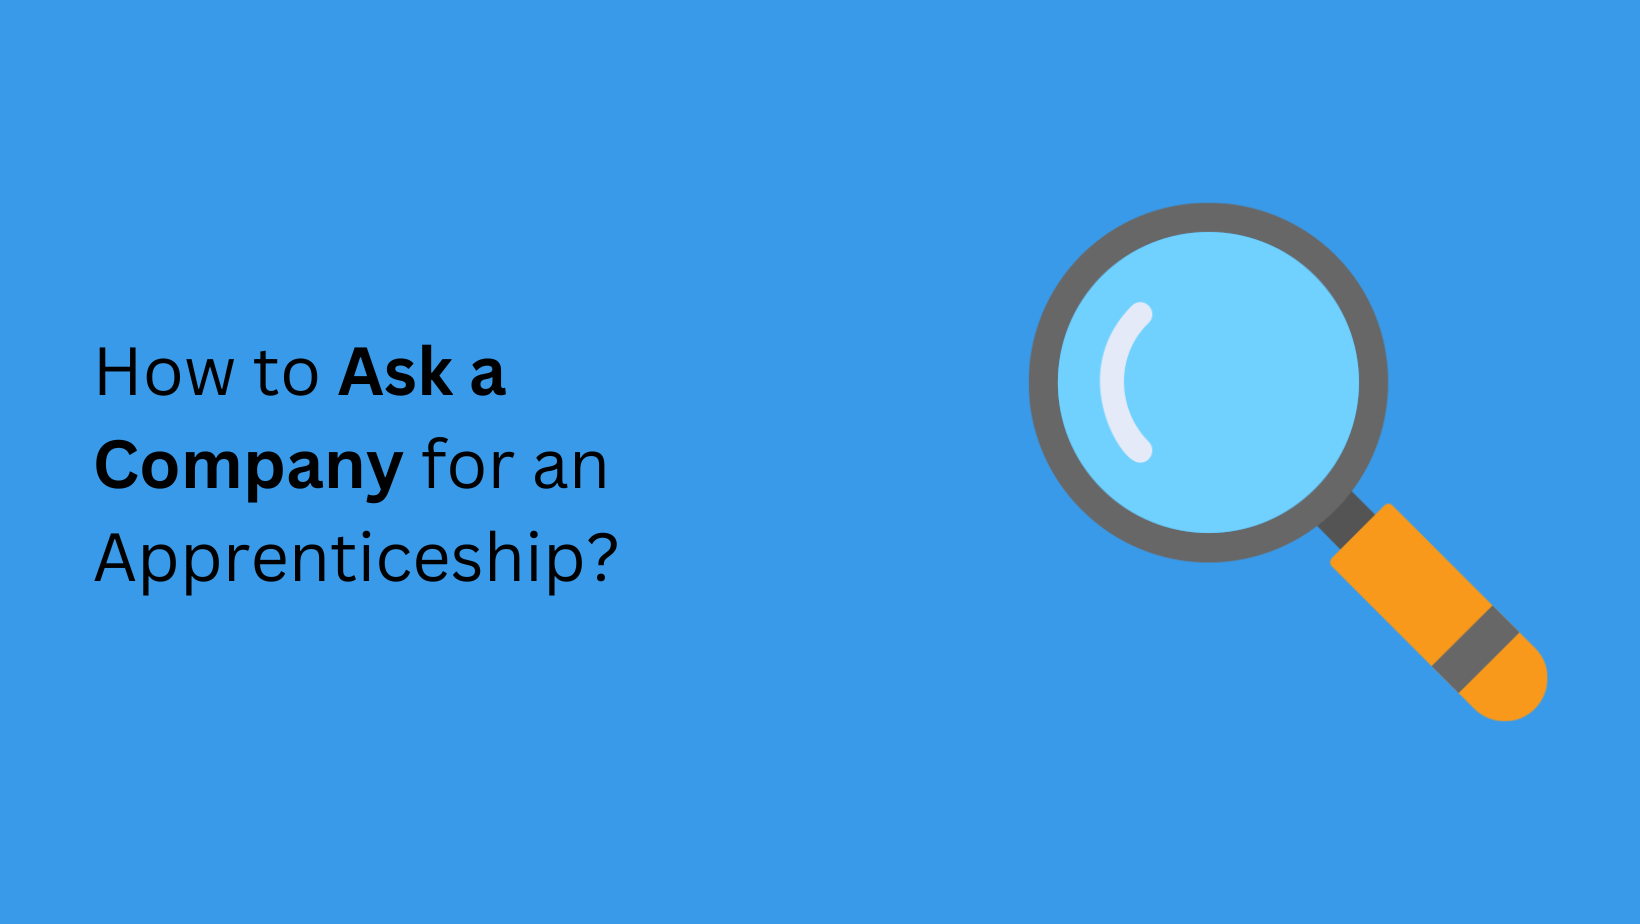 How To Ask A Company For An Apprenticeship